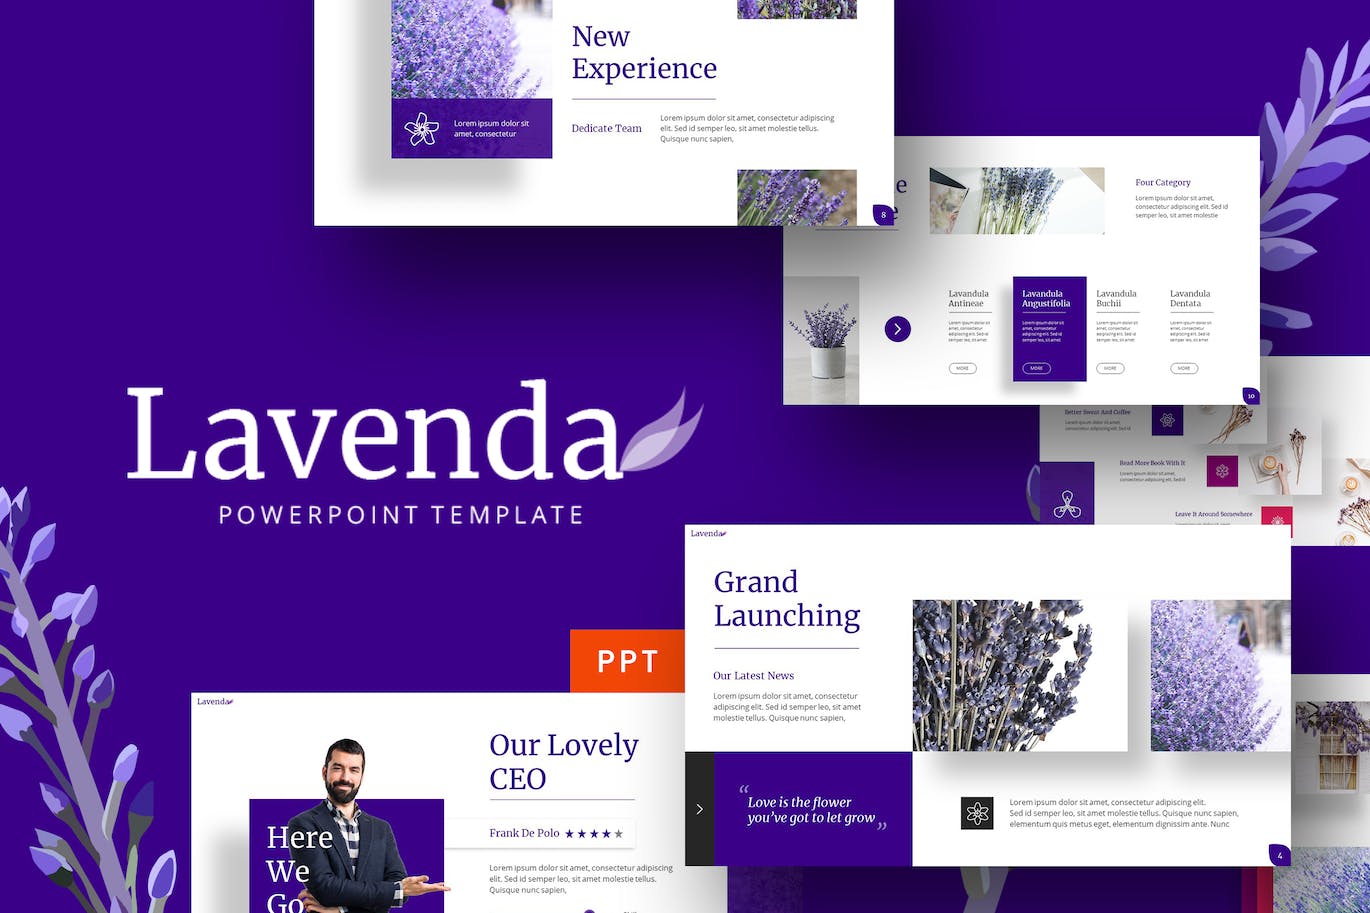 Collection of images of amazing presentation template slides on the theme of lavender flower.